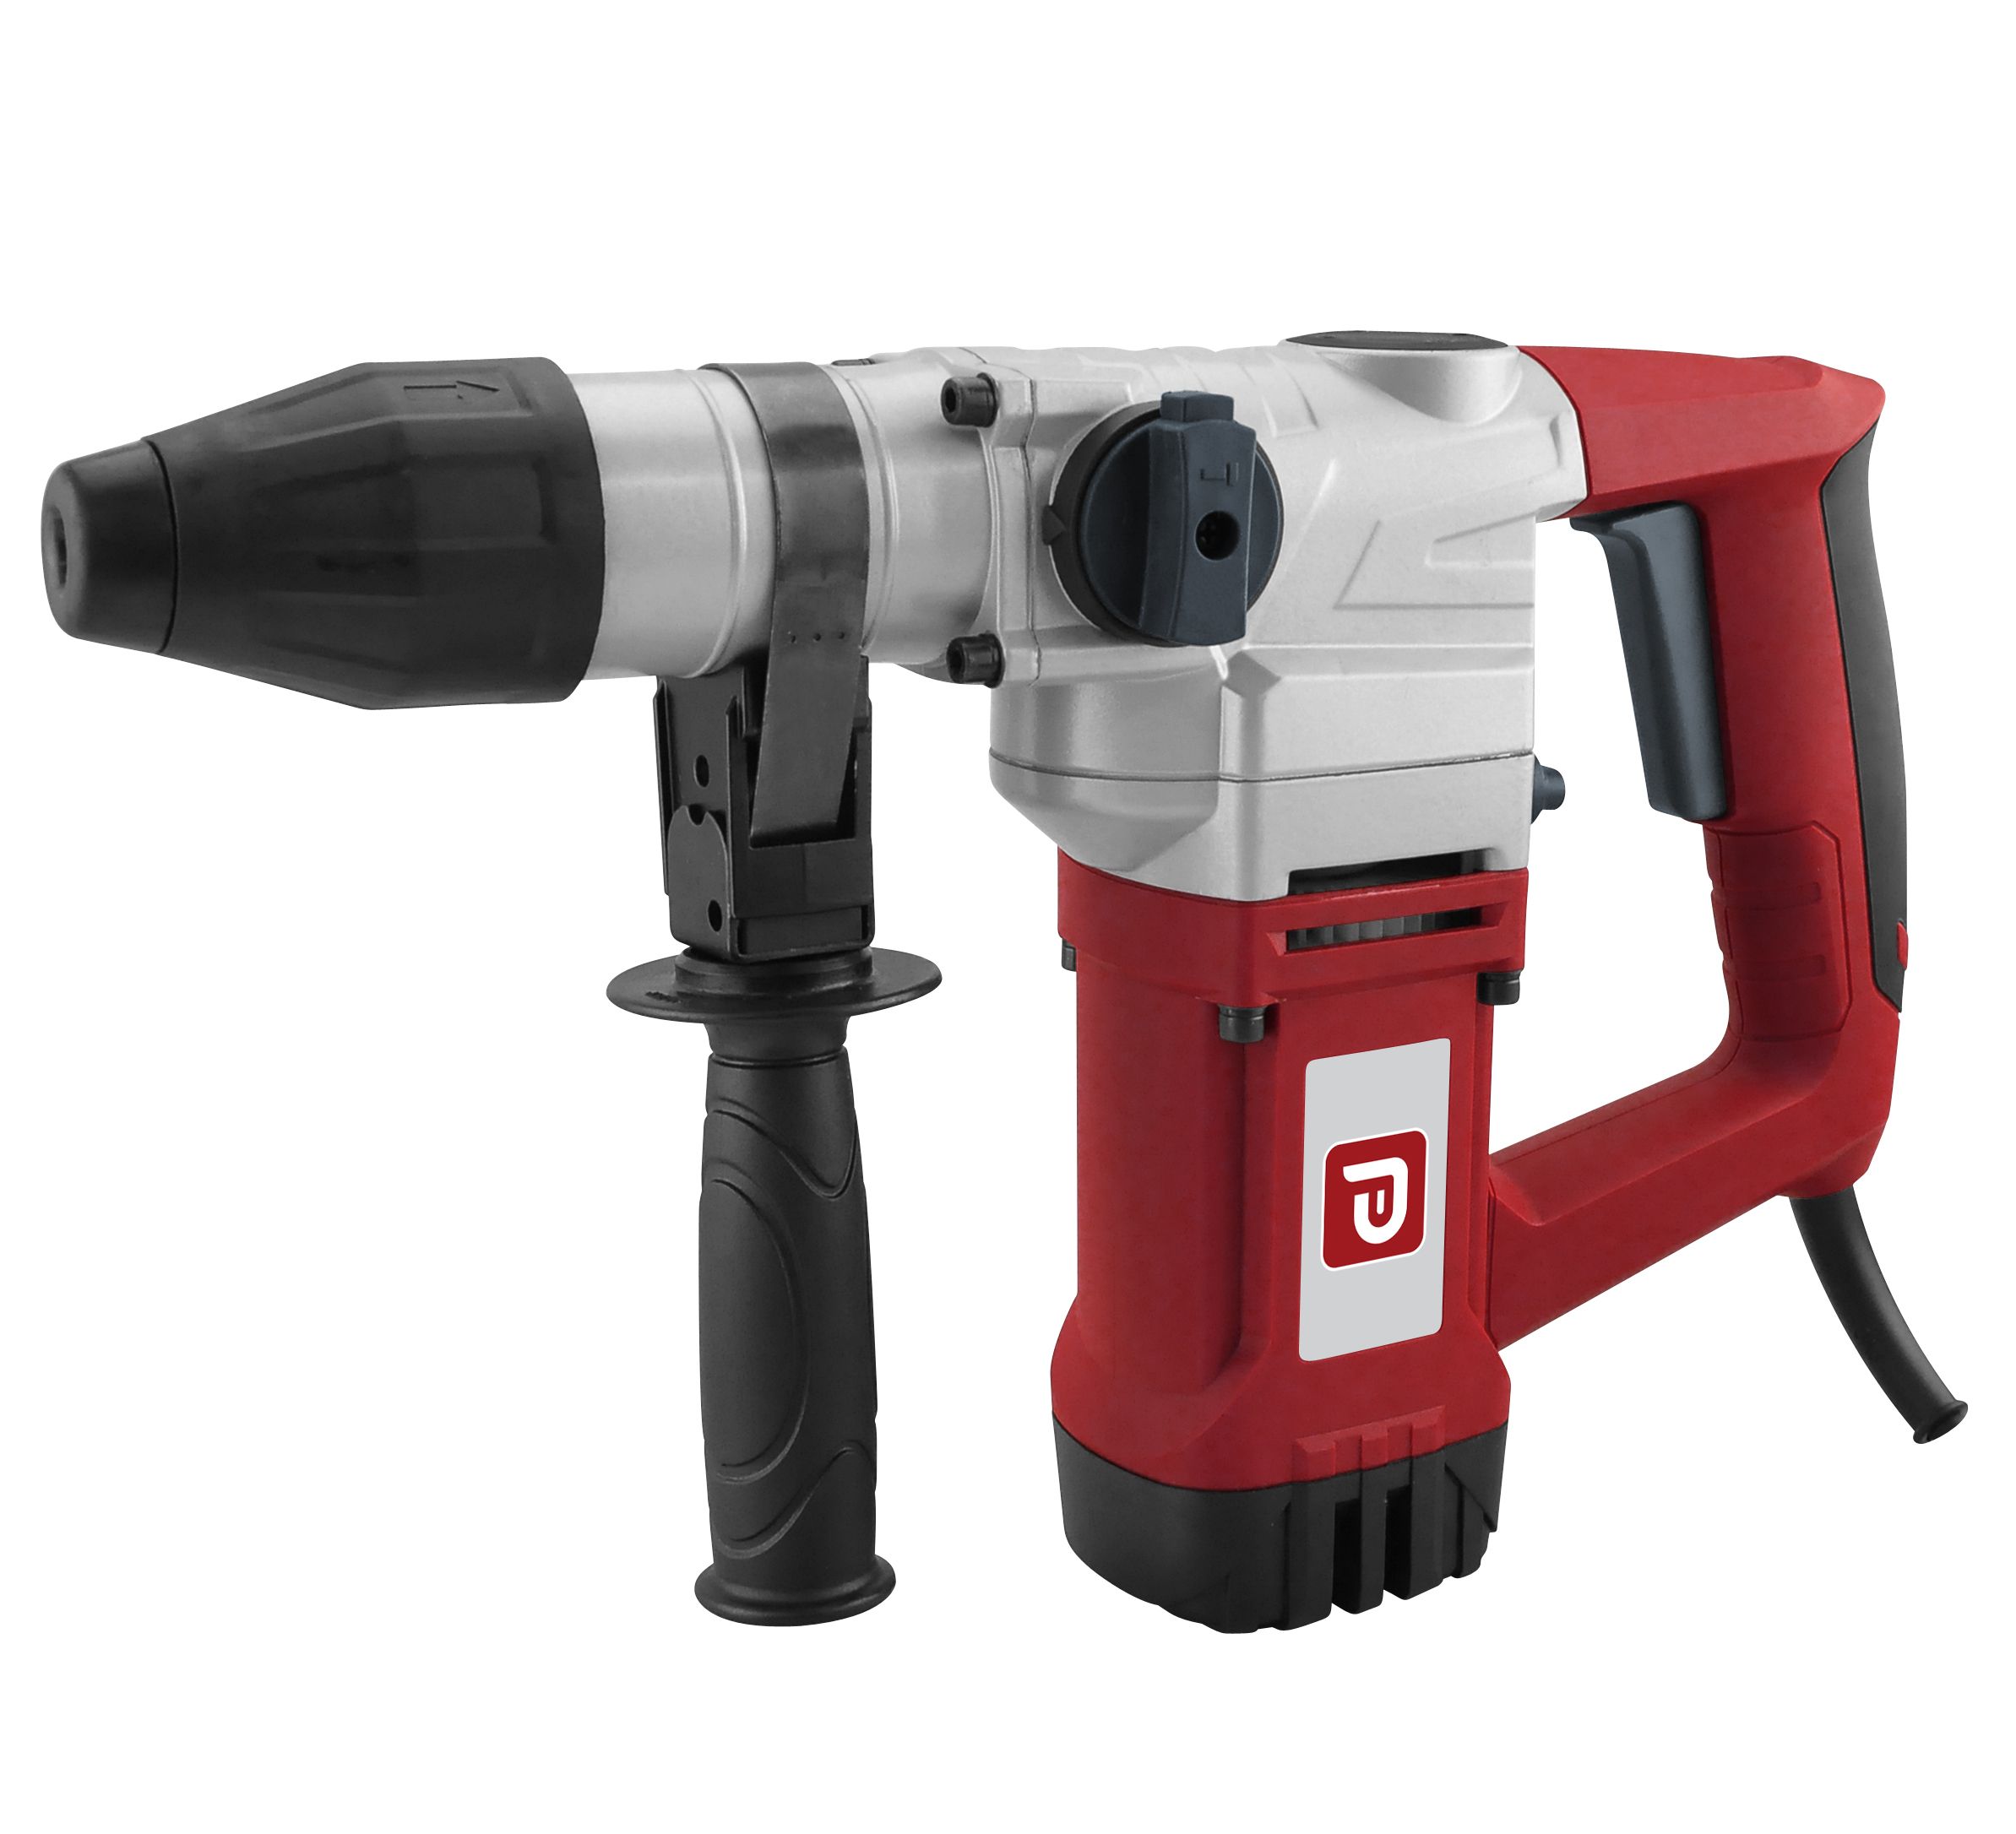 Performance Power SDS+ drill